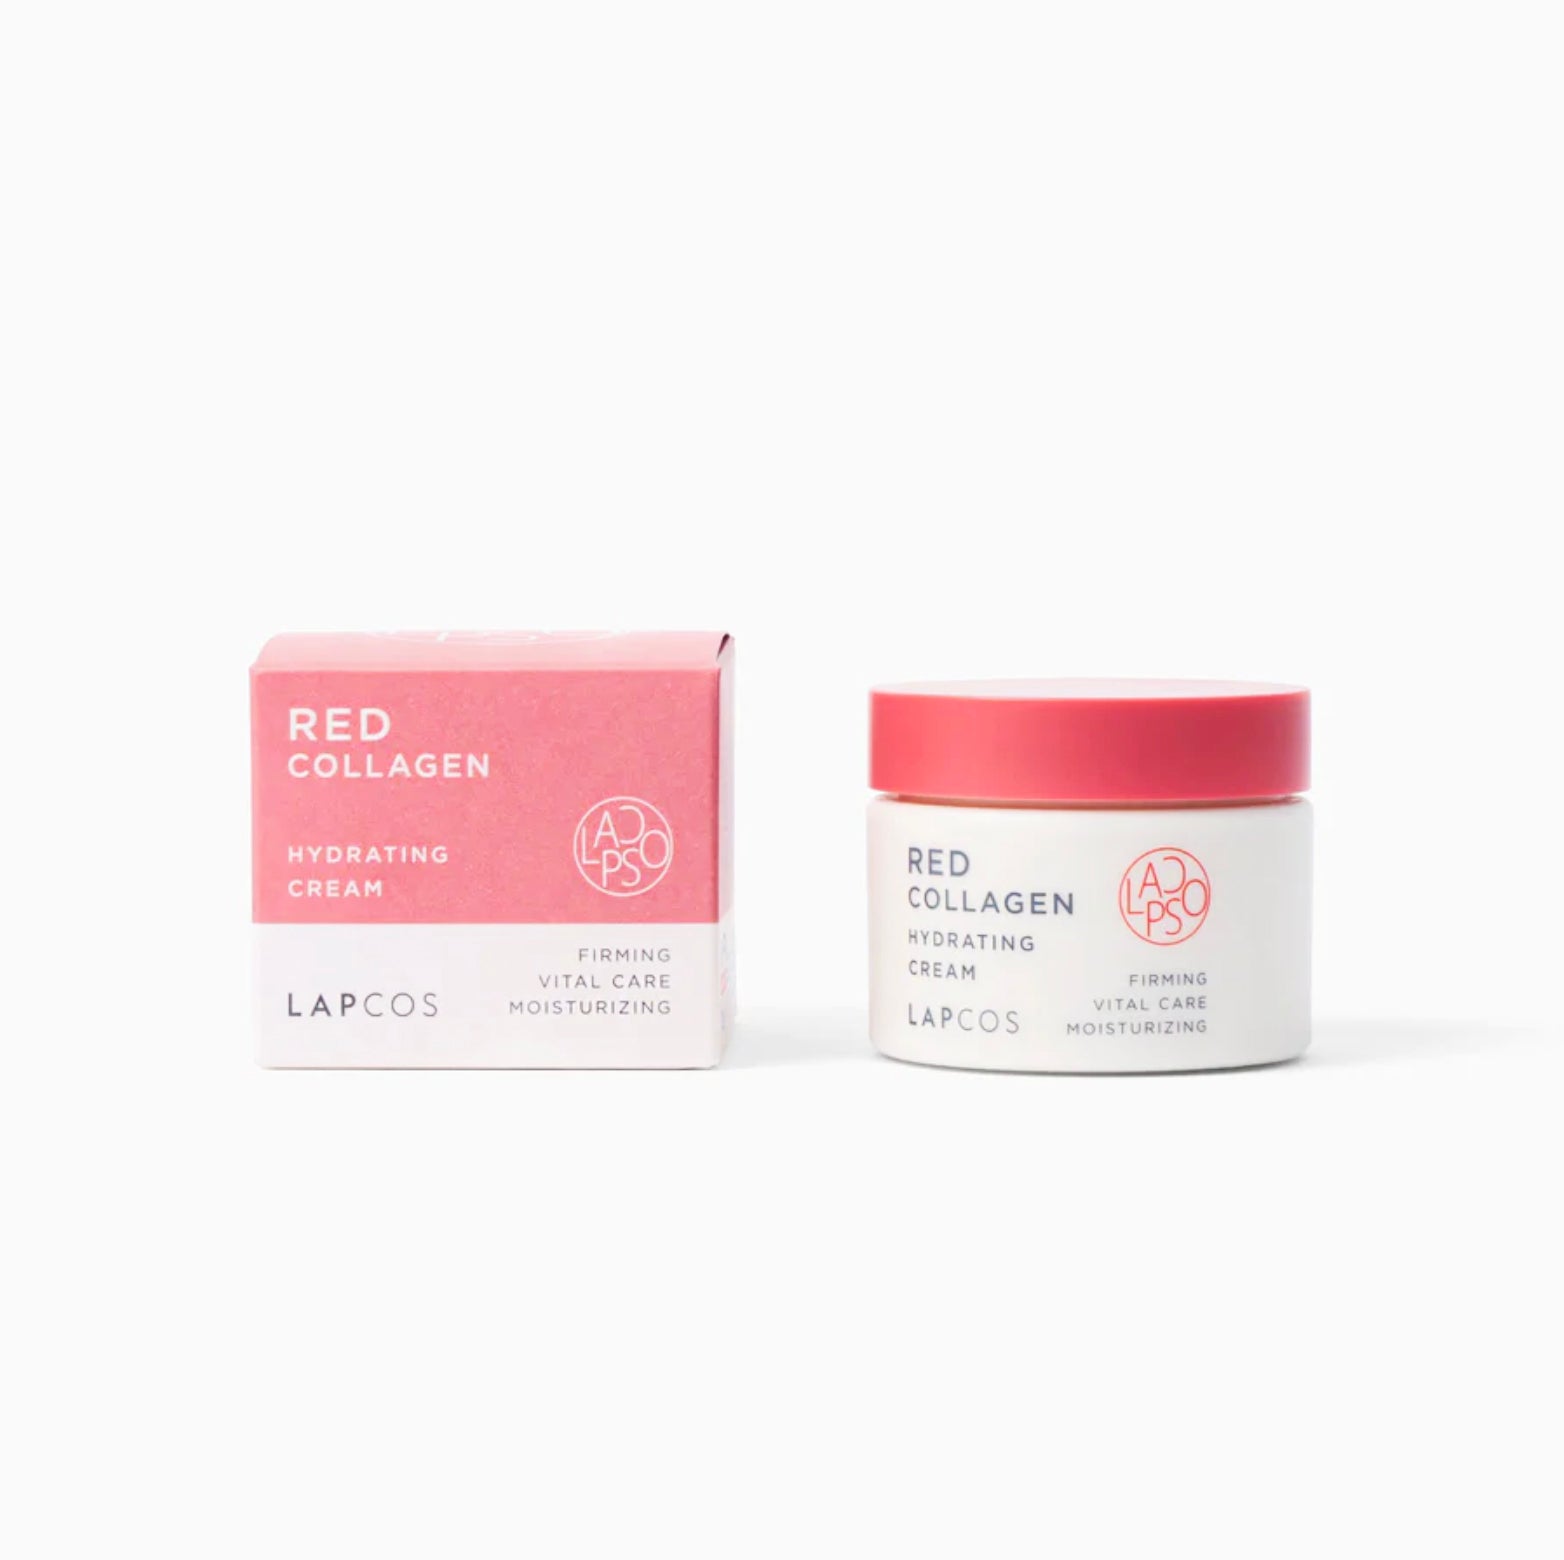 Lapcos Red V Collagen Hydrating Cream